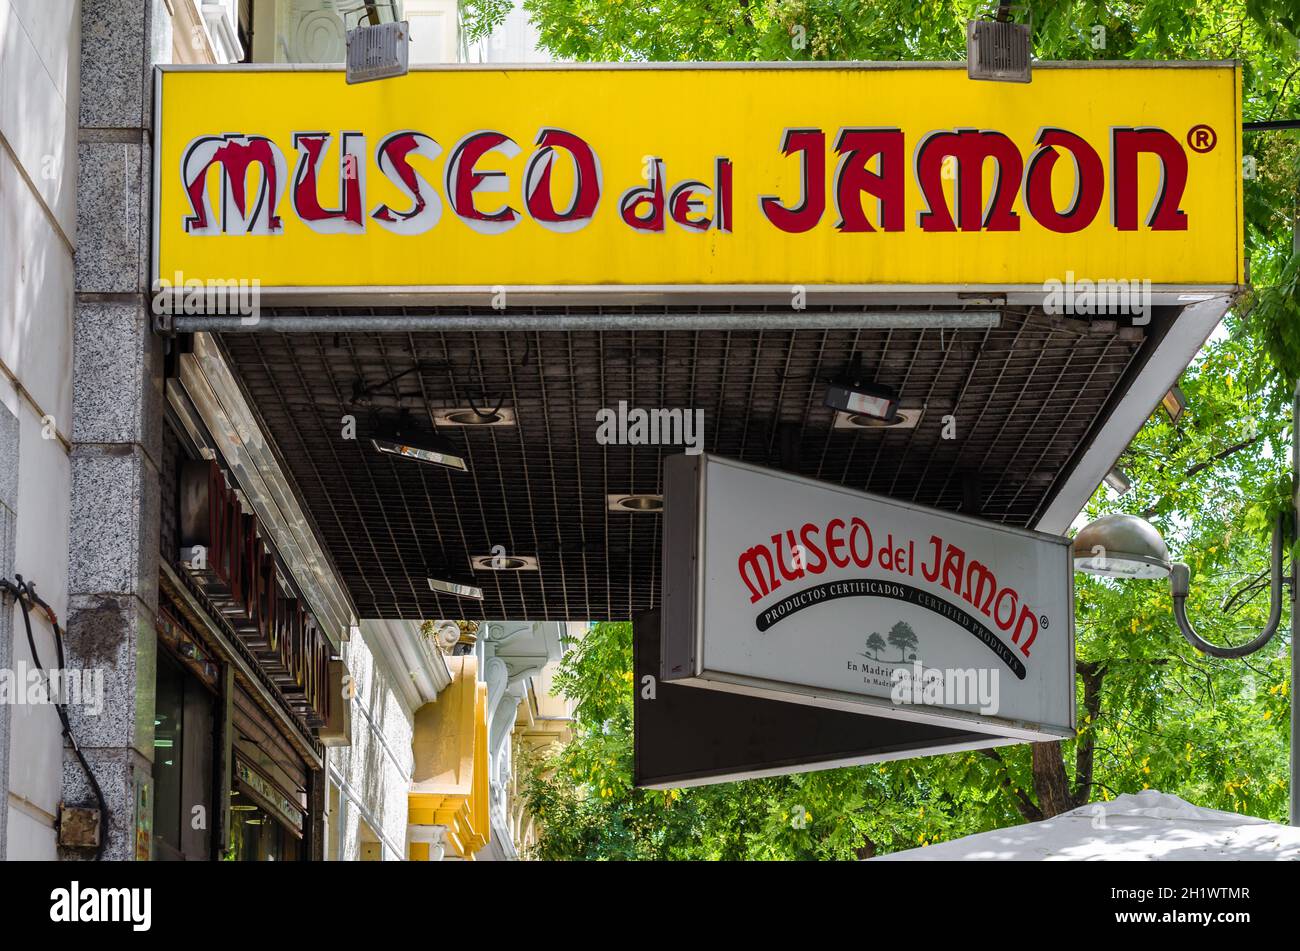 MADRID, SPAIN - JULY 23, 2021: Facade of 'Museo del Jamon' (The Ham Museum) restaurant in Madrid, Spain, a chain specialized in Iberian ham Stock Photo